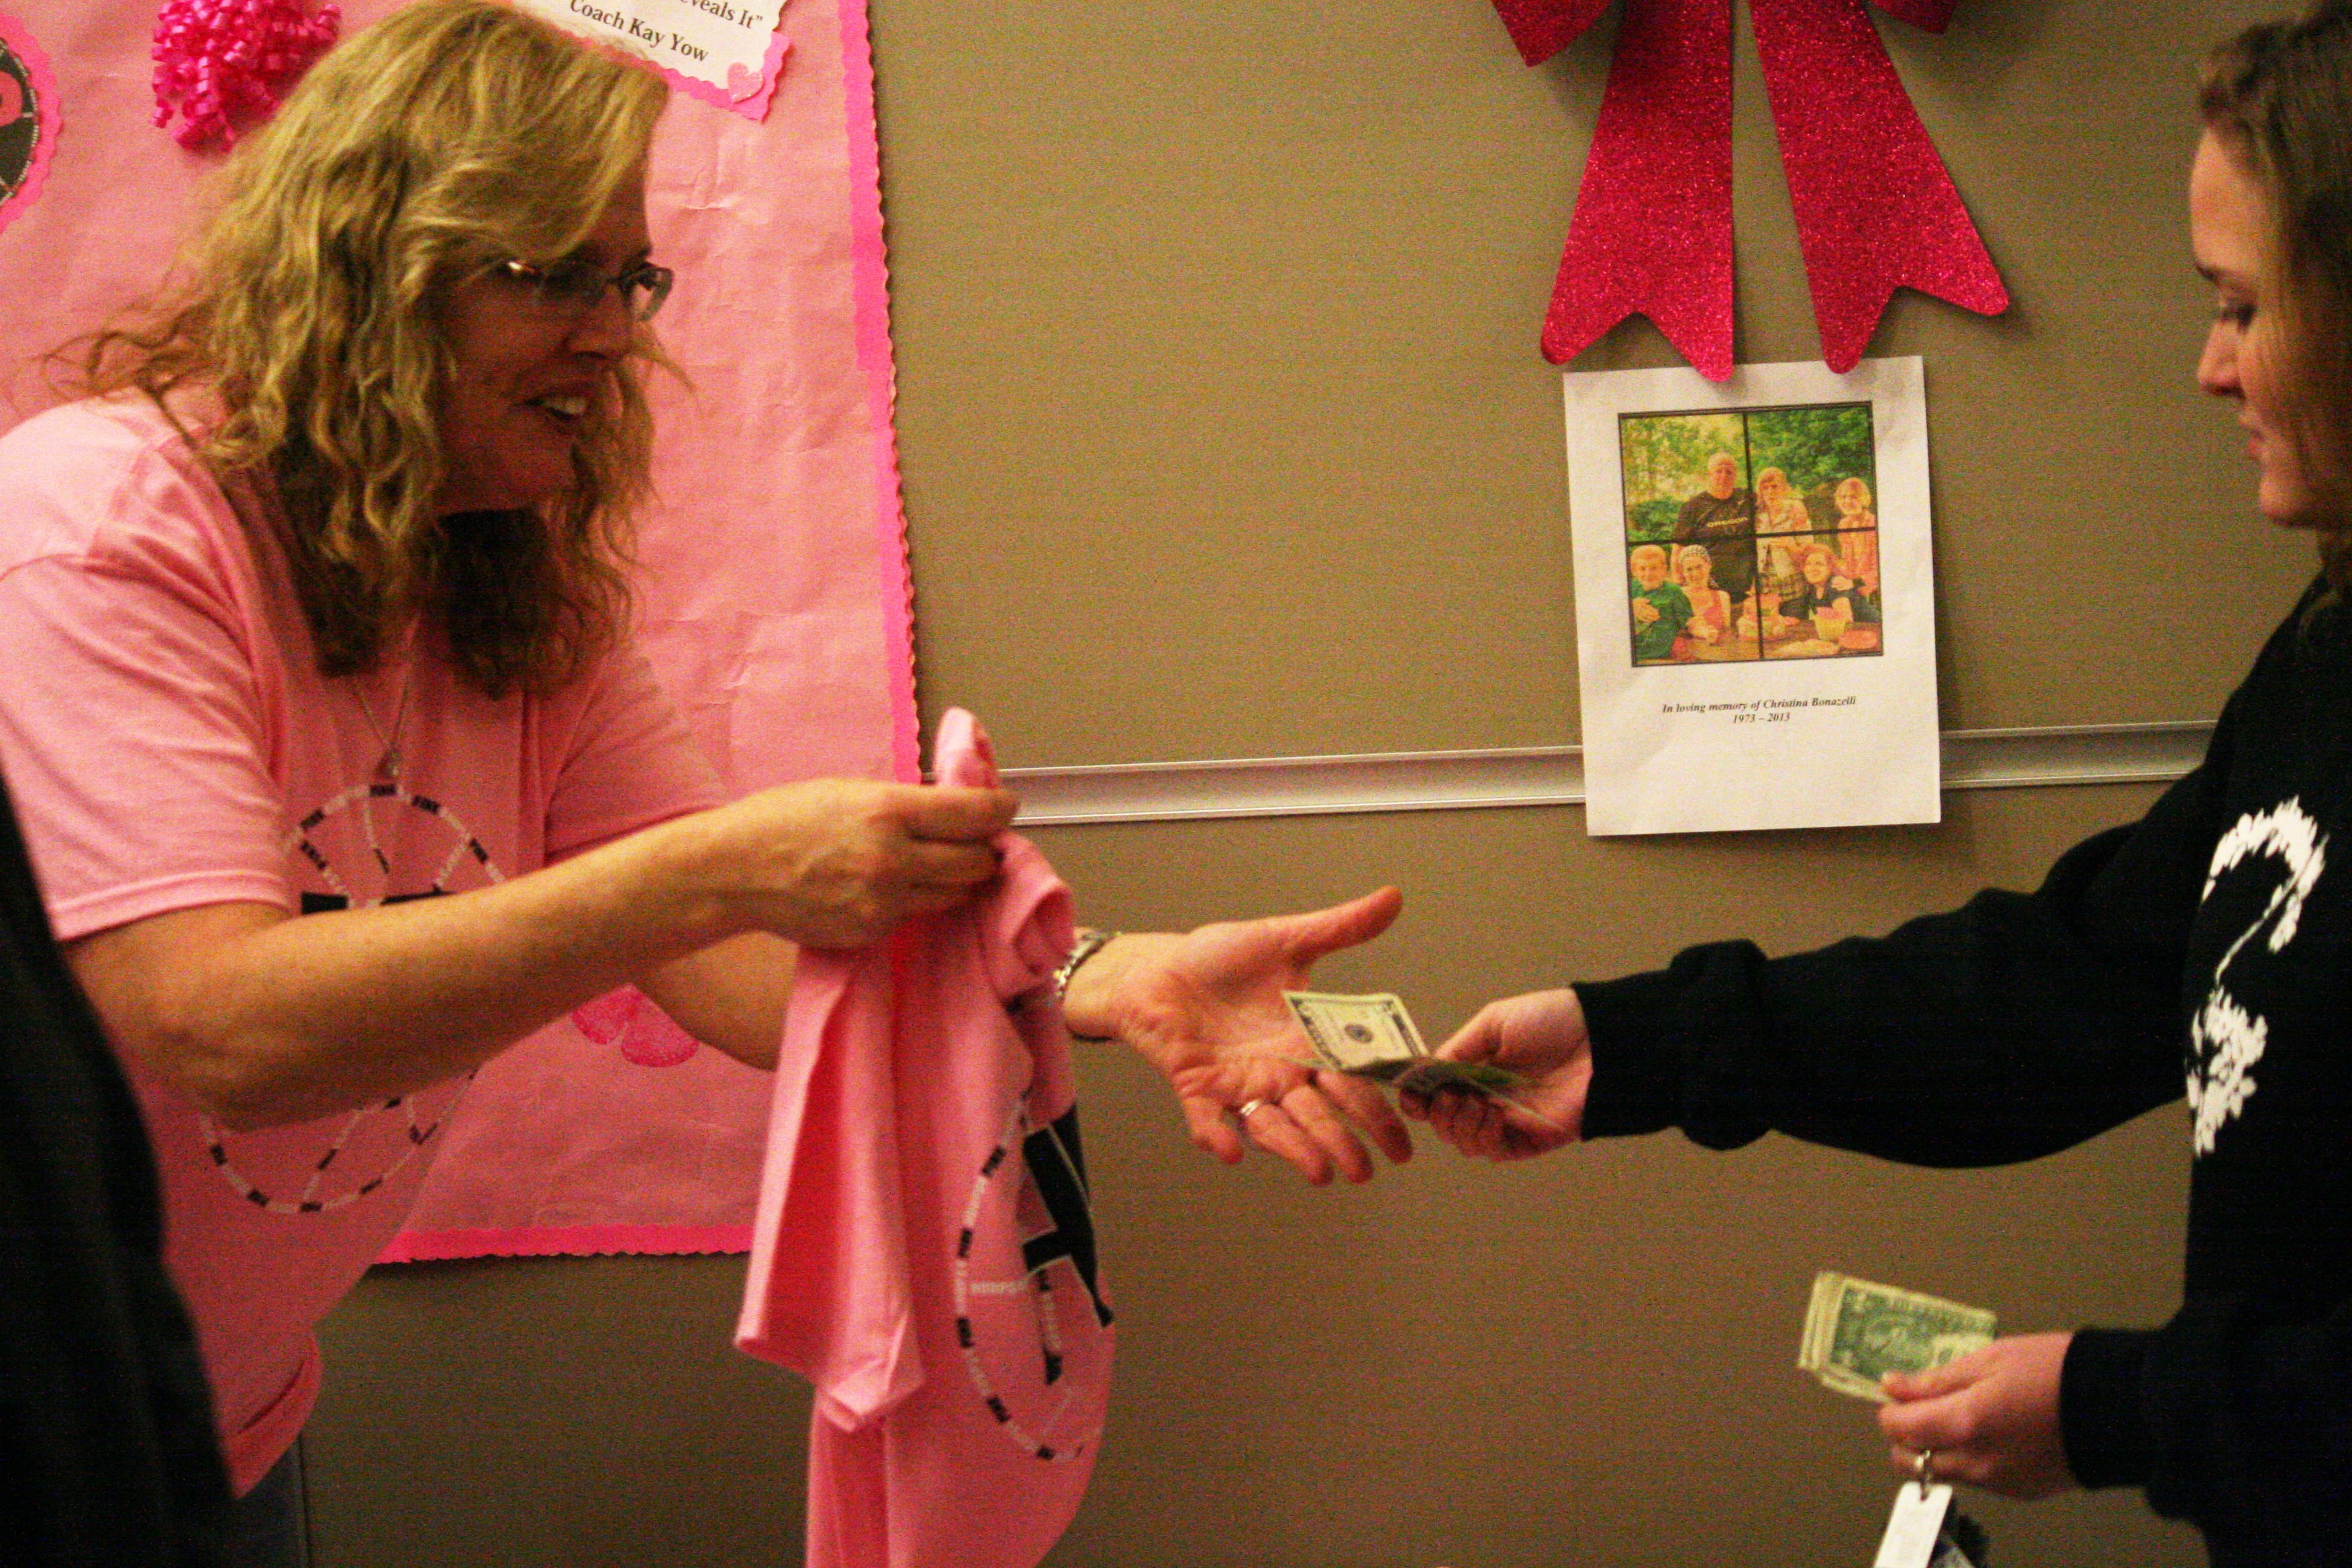 A Hoops for Pink T-shirt gets sold.